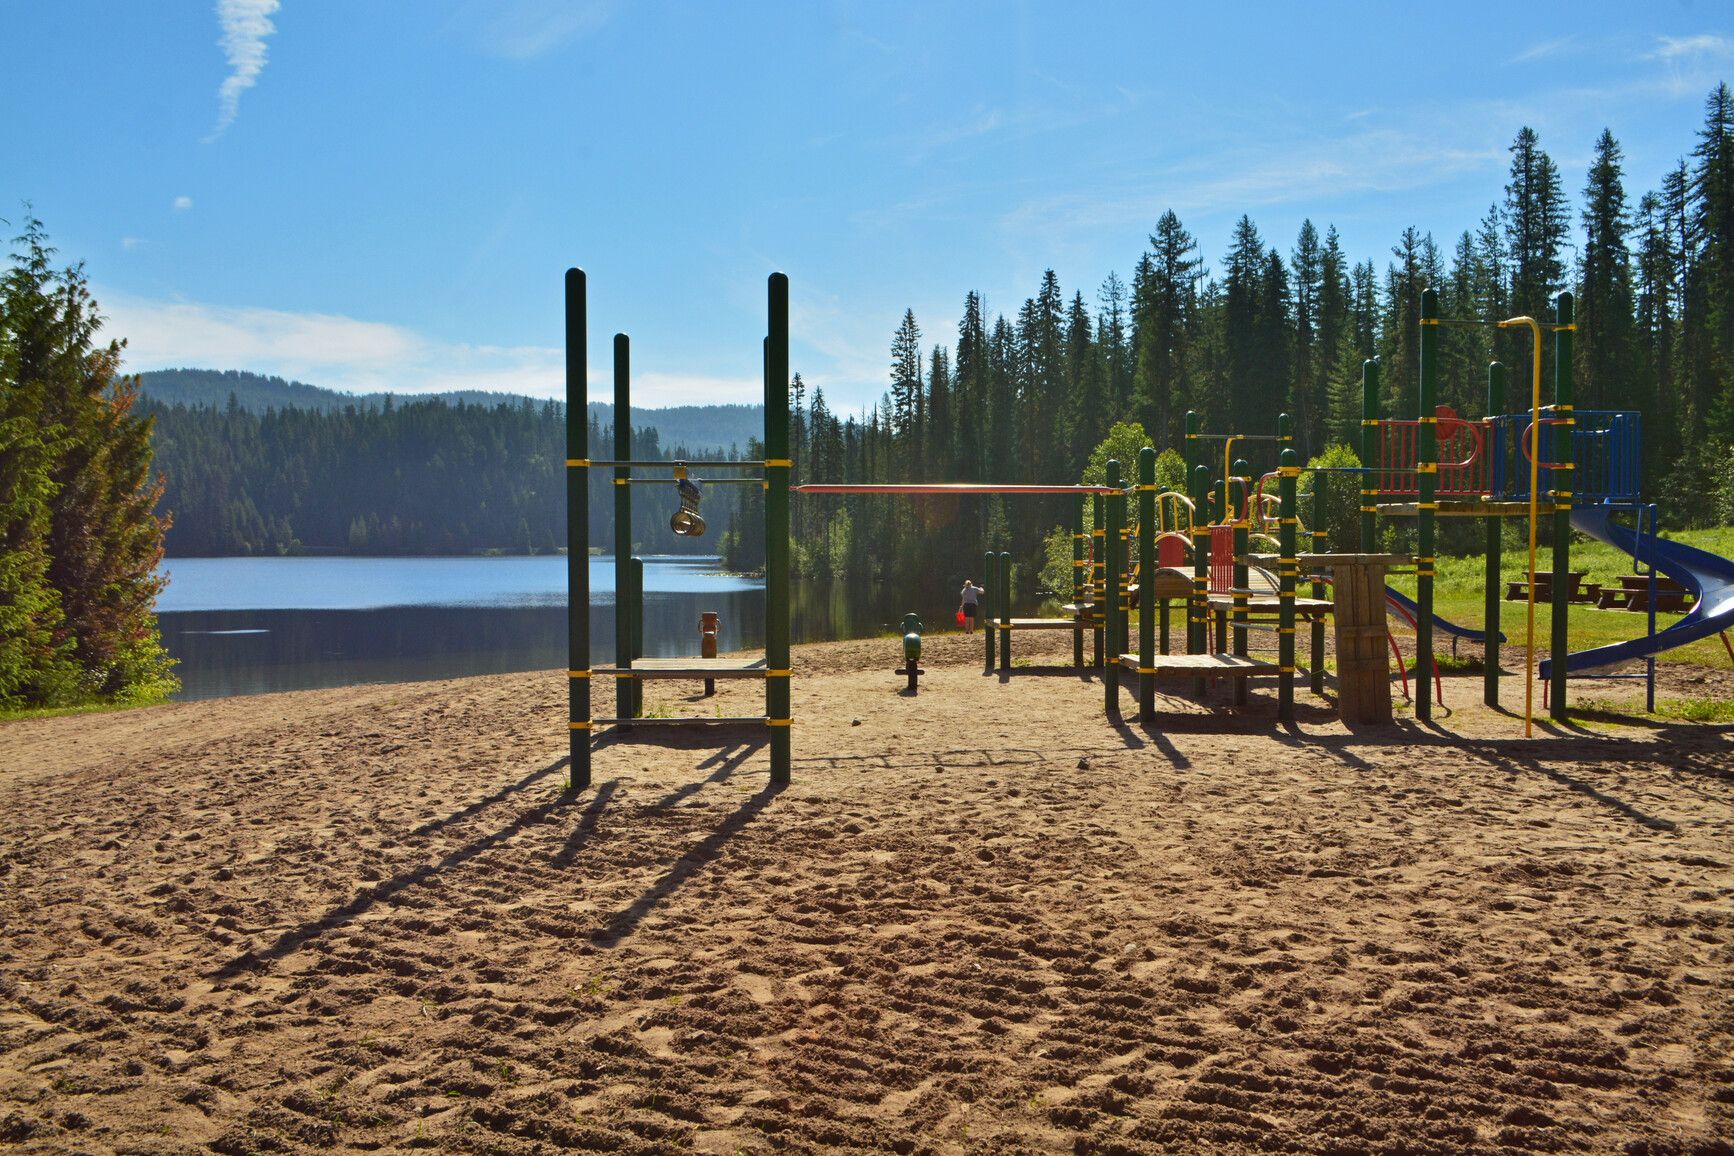 Beach-side playground by Third Lake in Champion Lakes Park